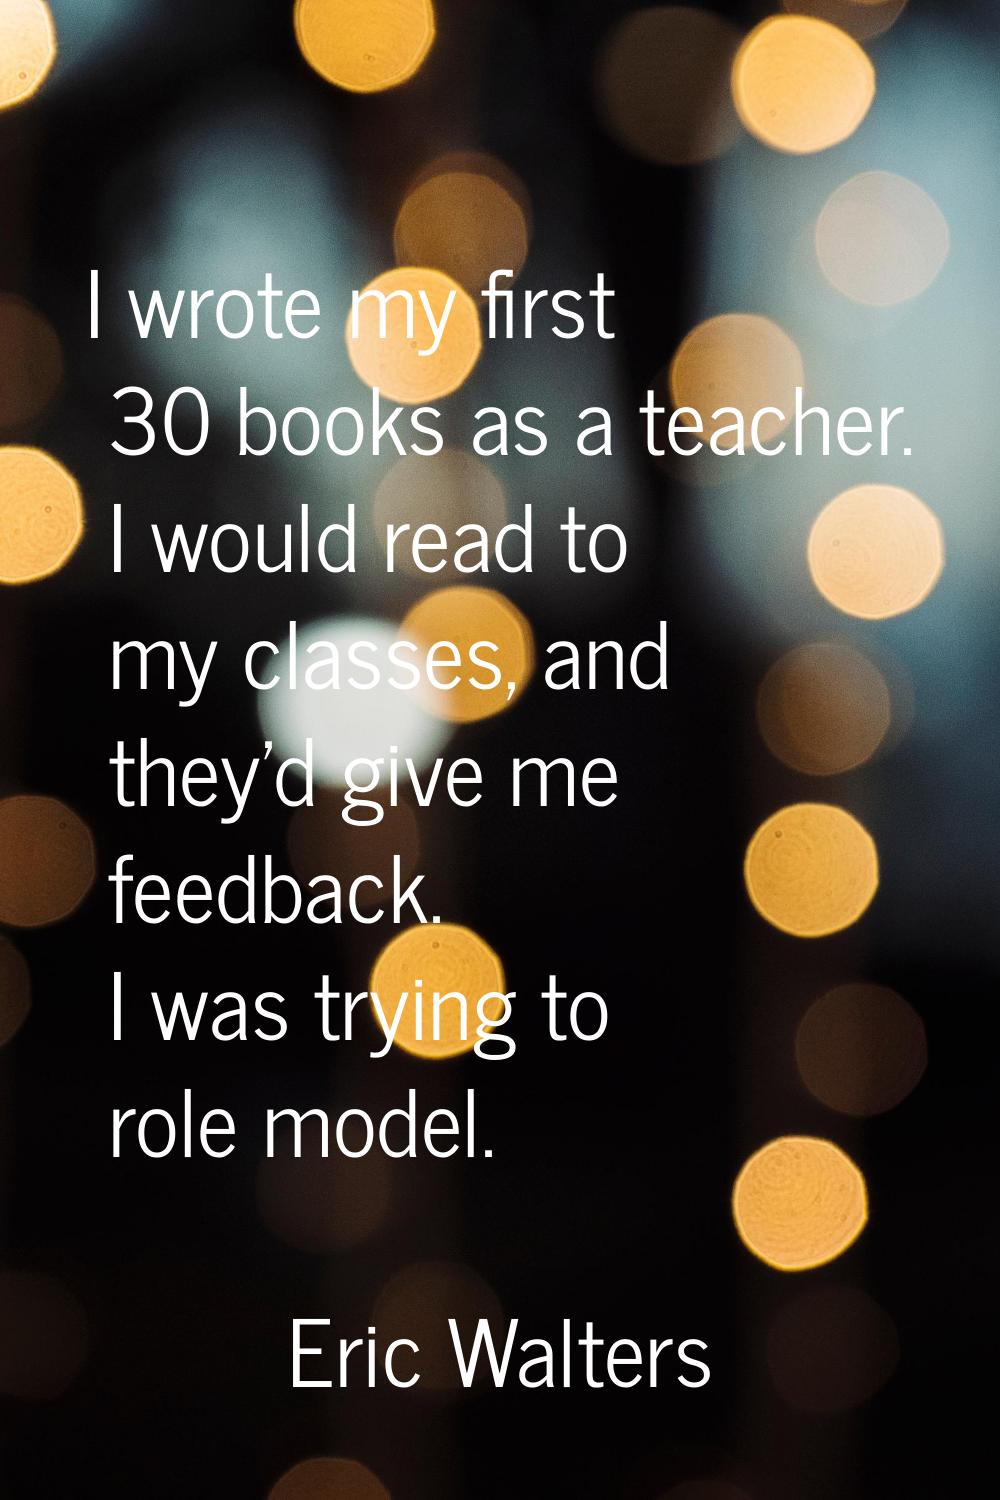 I wrote my first 30 books as a teacher. I would read to my classes, and they'd give me feedback. I 